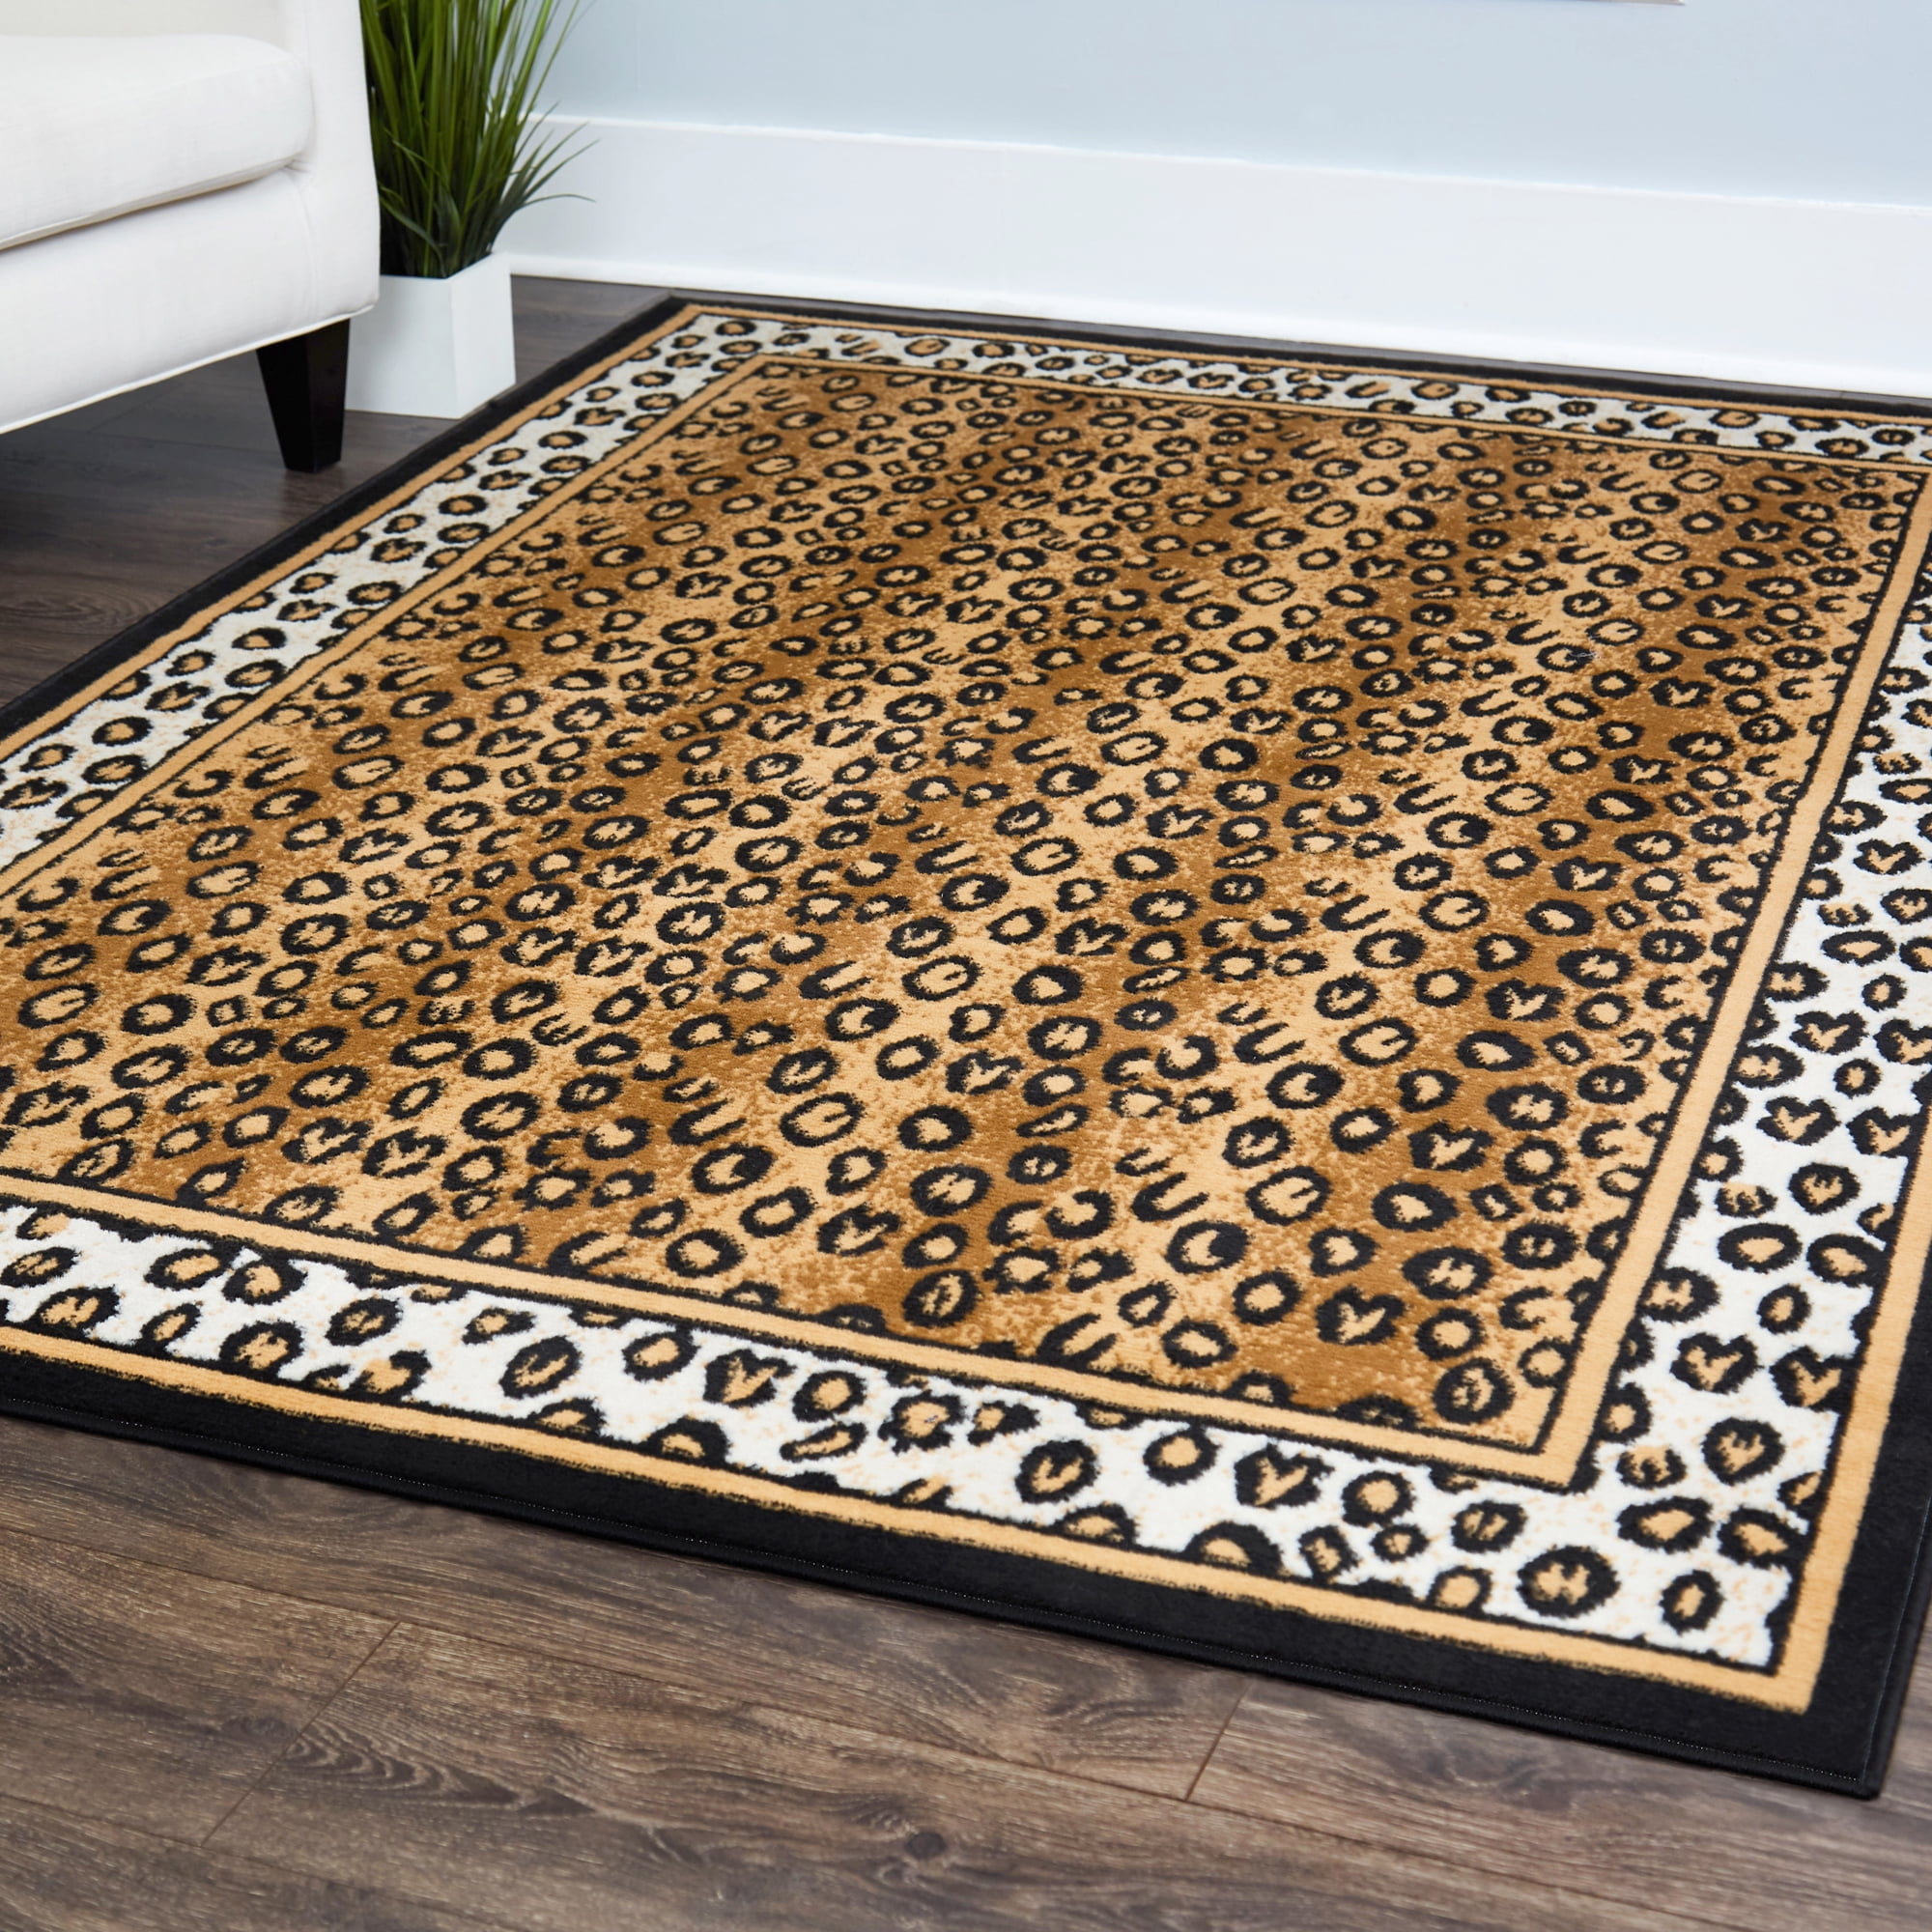 Large Leopard Print Rug Skin Mat Leather Faux Fur Animals Area Rugs Home Carpets 